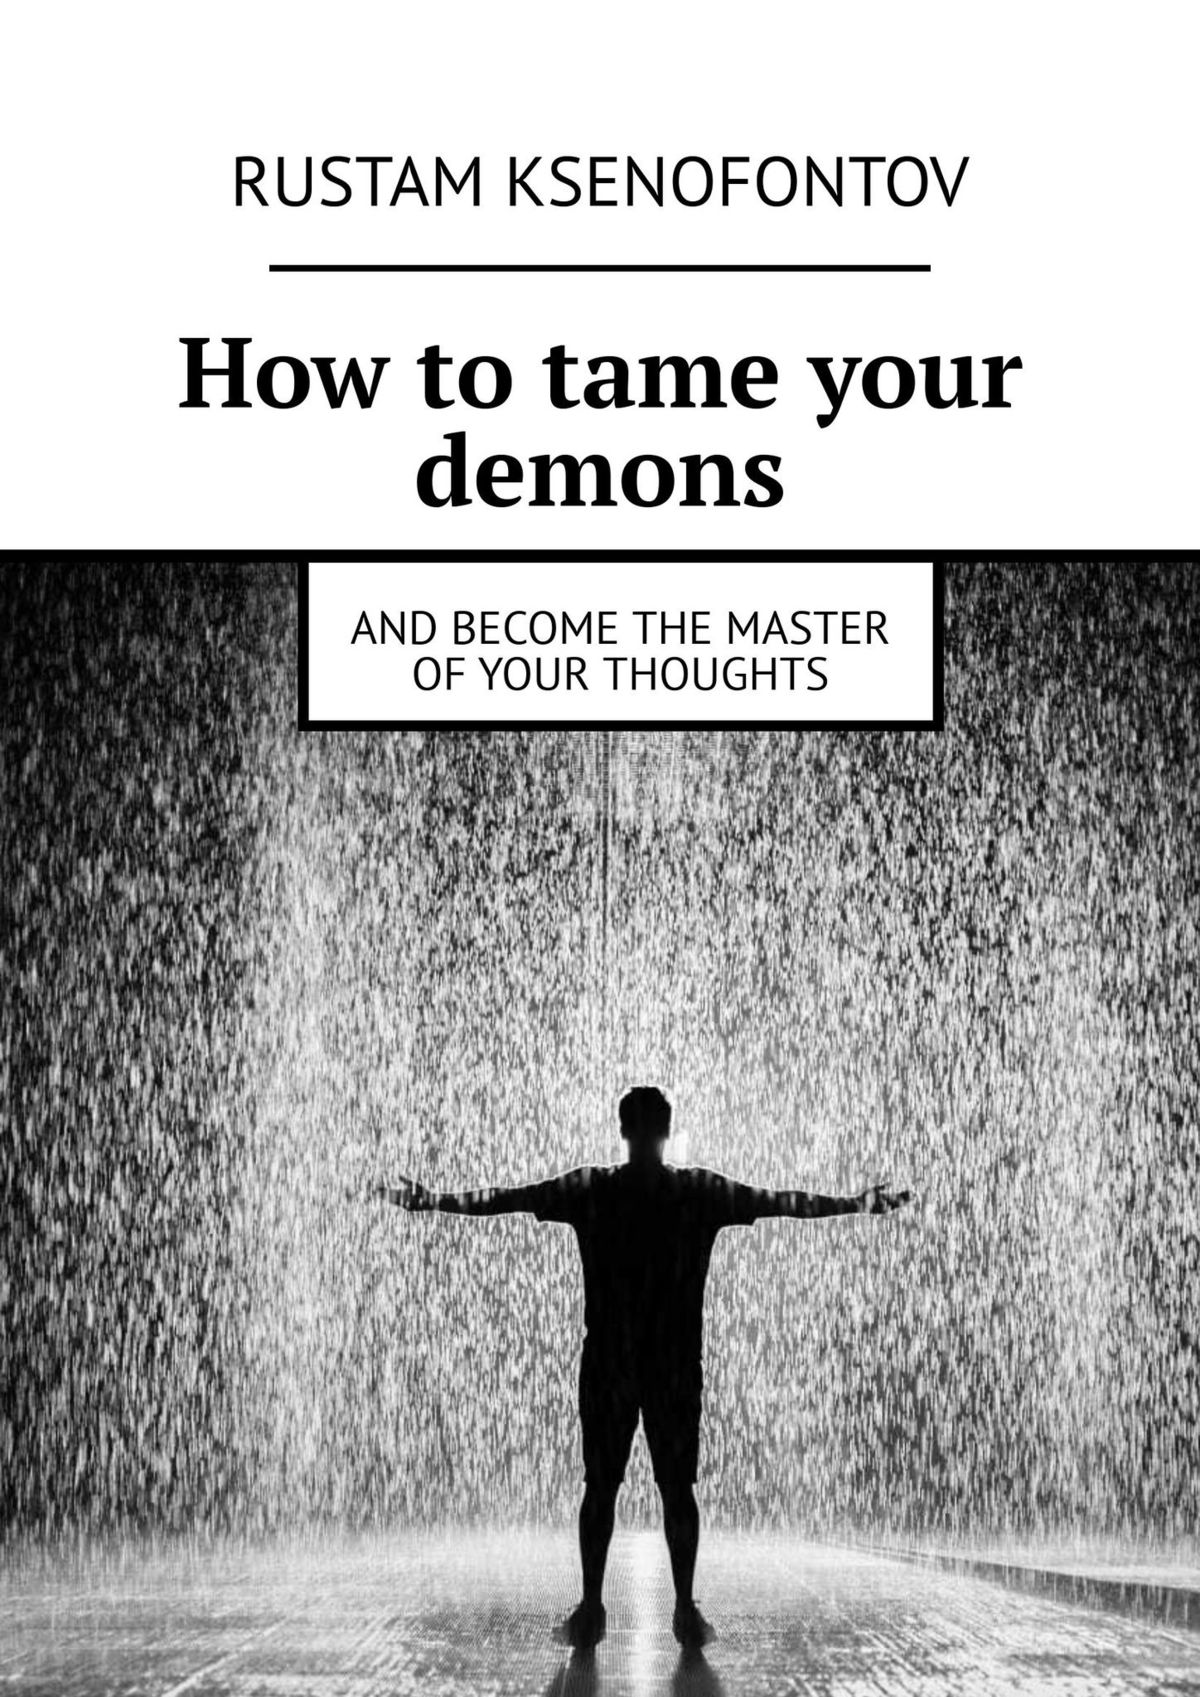 How to tame your demons. And become the master of your thoughts